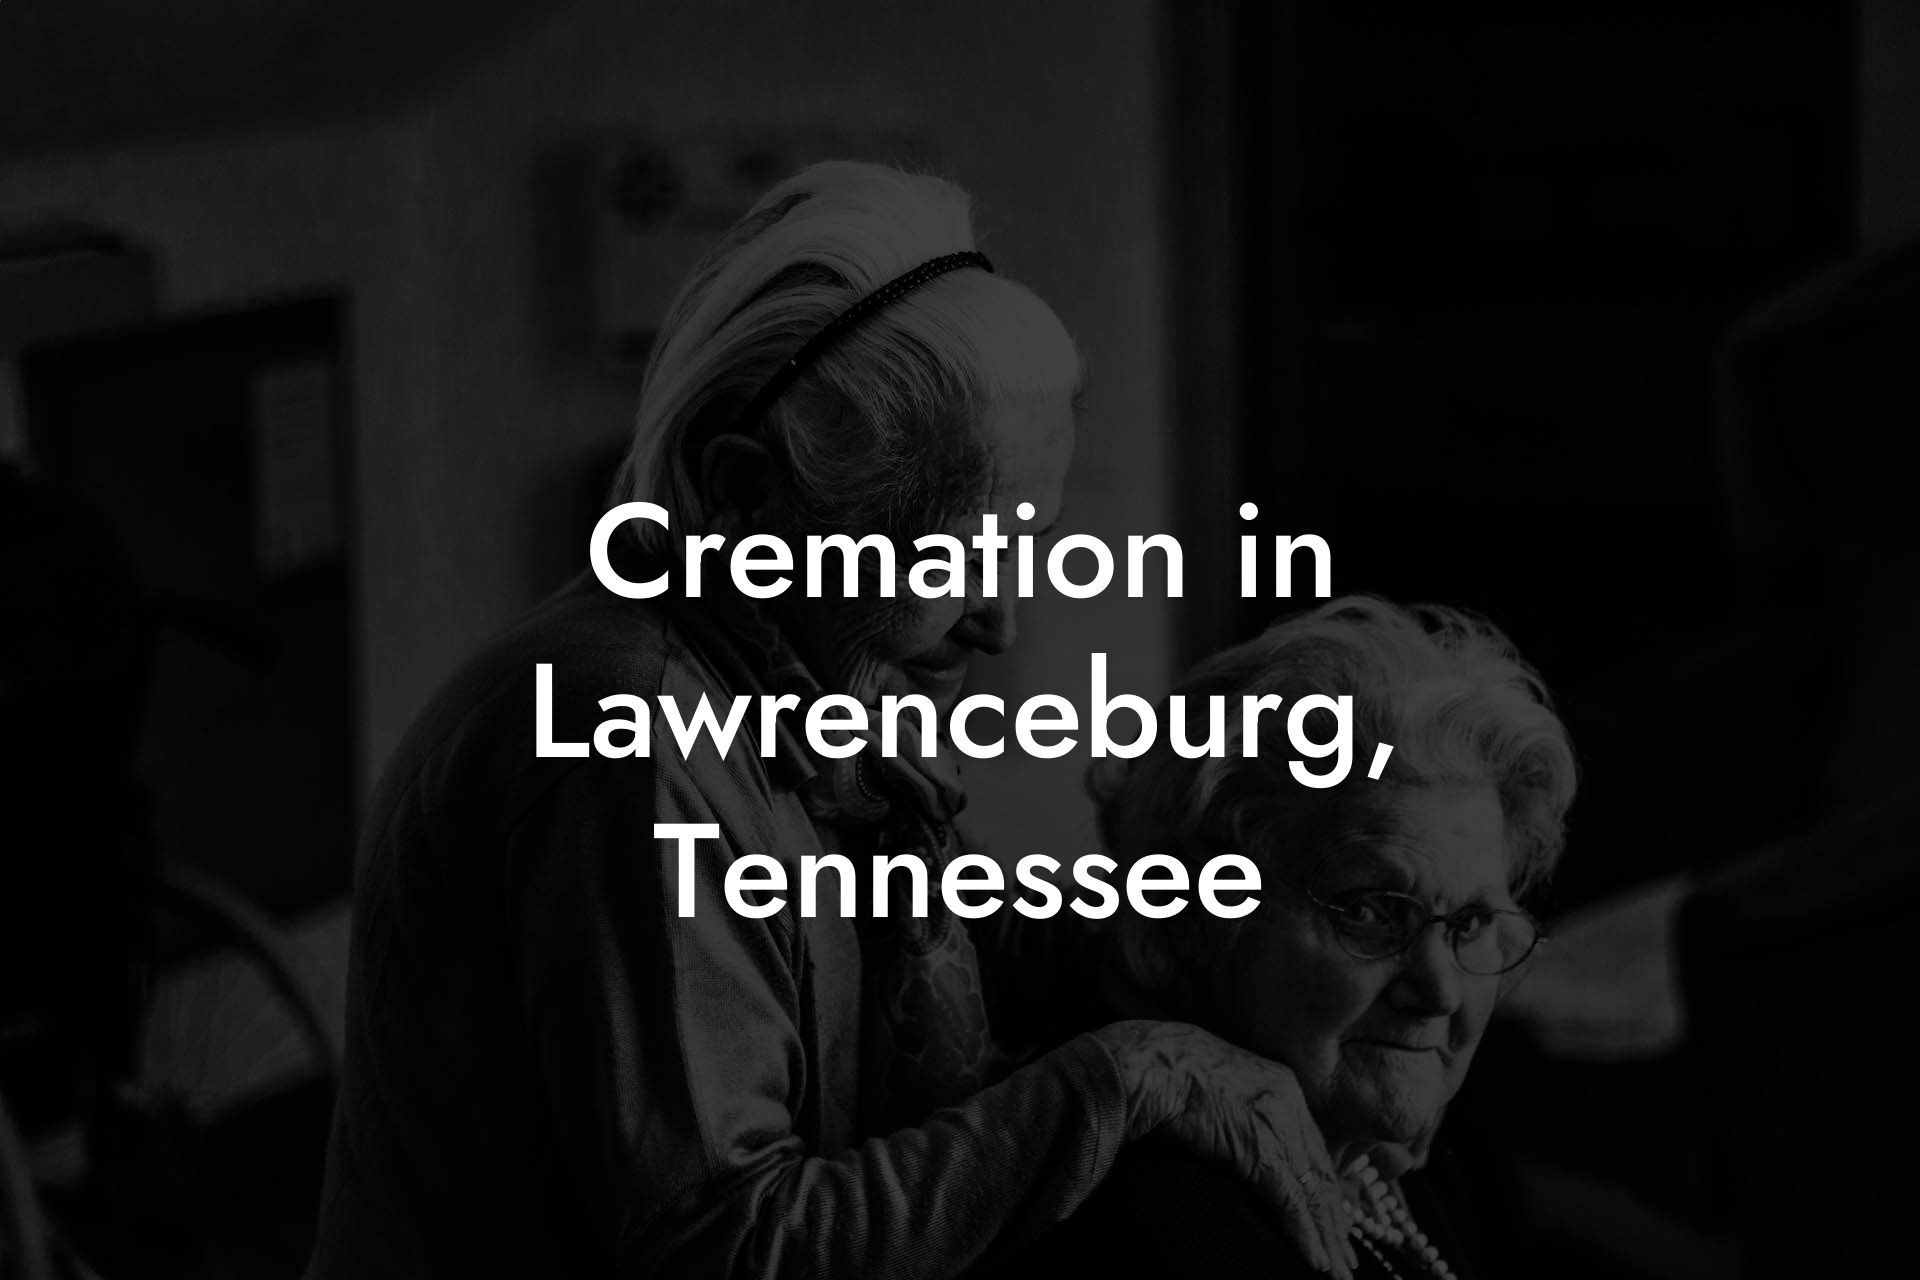 Cremation in Lawrenceburg, Tennessee